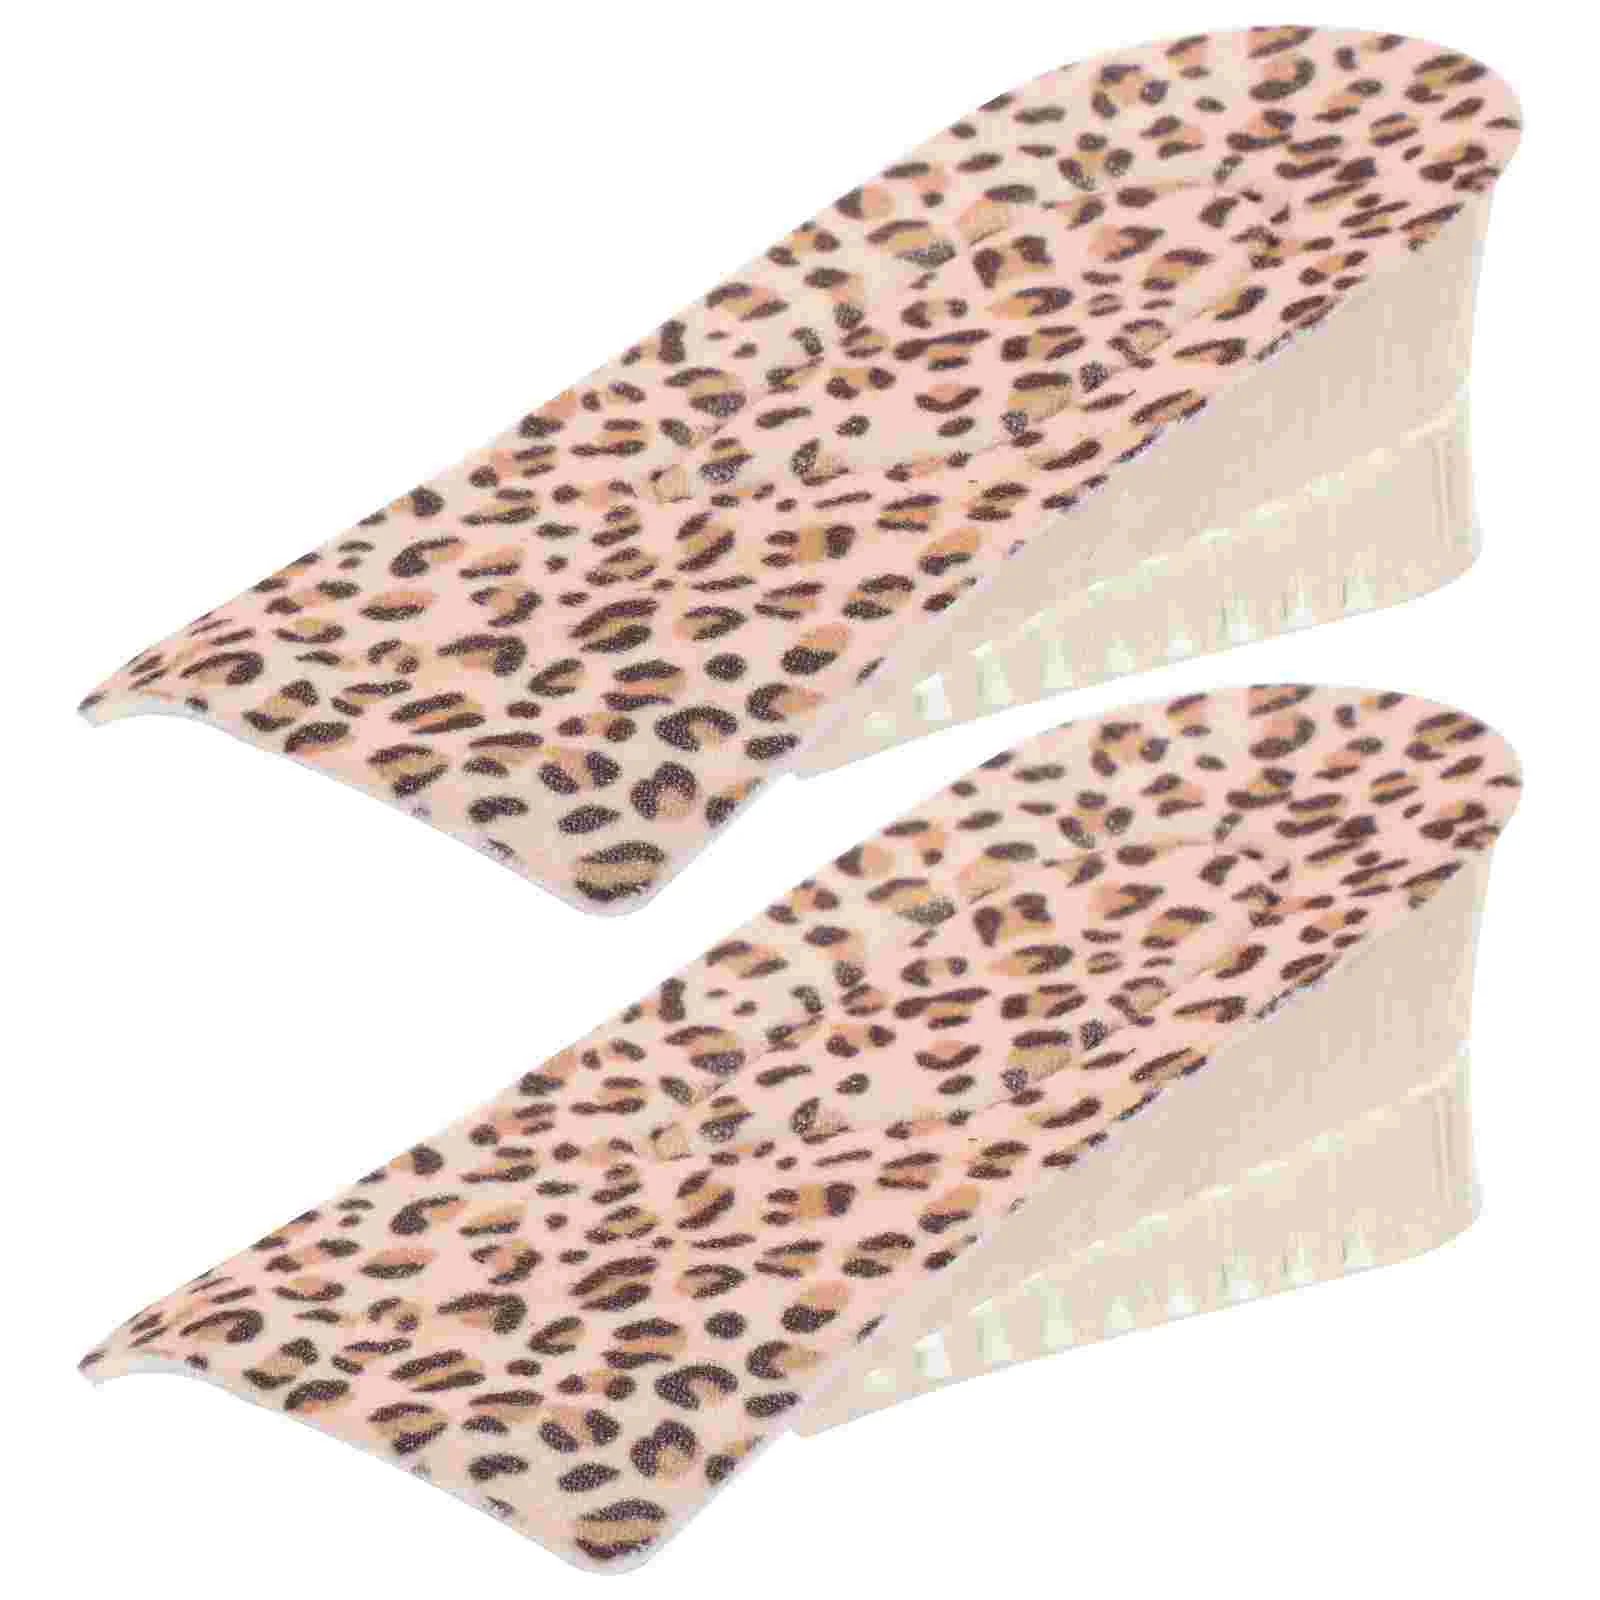 Heightening Insoles Invisible Increase Shoe Cushion Internal Even up Leveler Women Insert 2pcs sumifun layers invisible height increase foot pads insoles adjustable increase leg length difference heel pad foot care